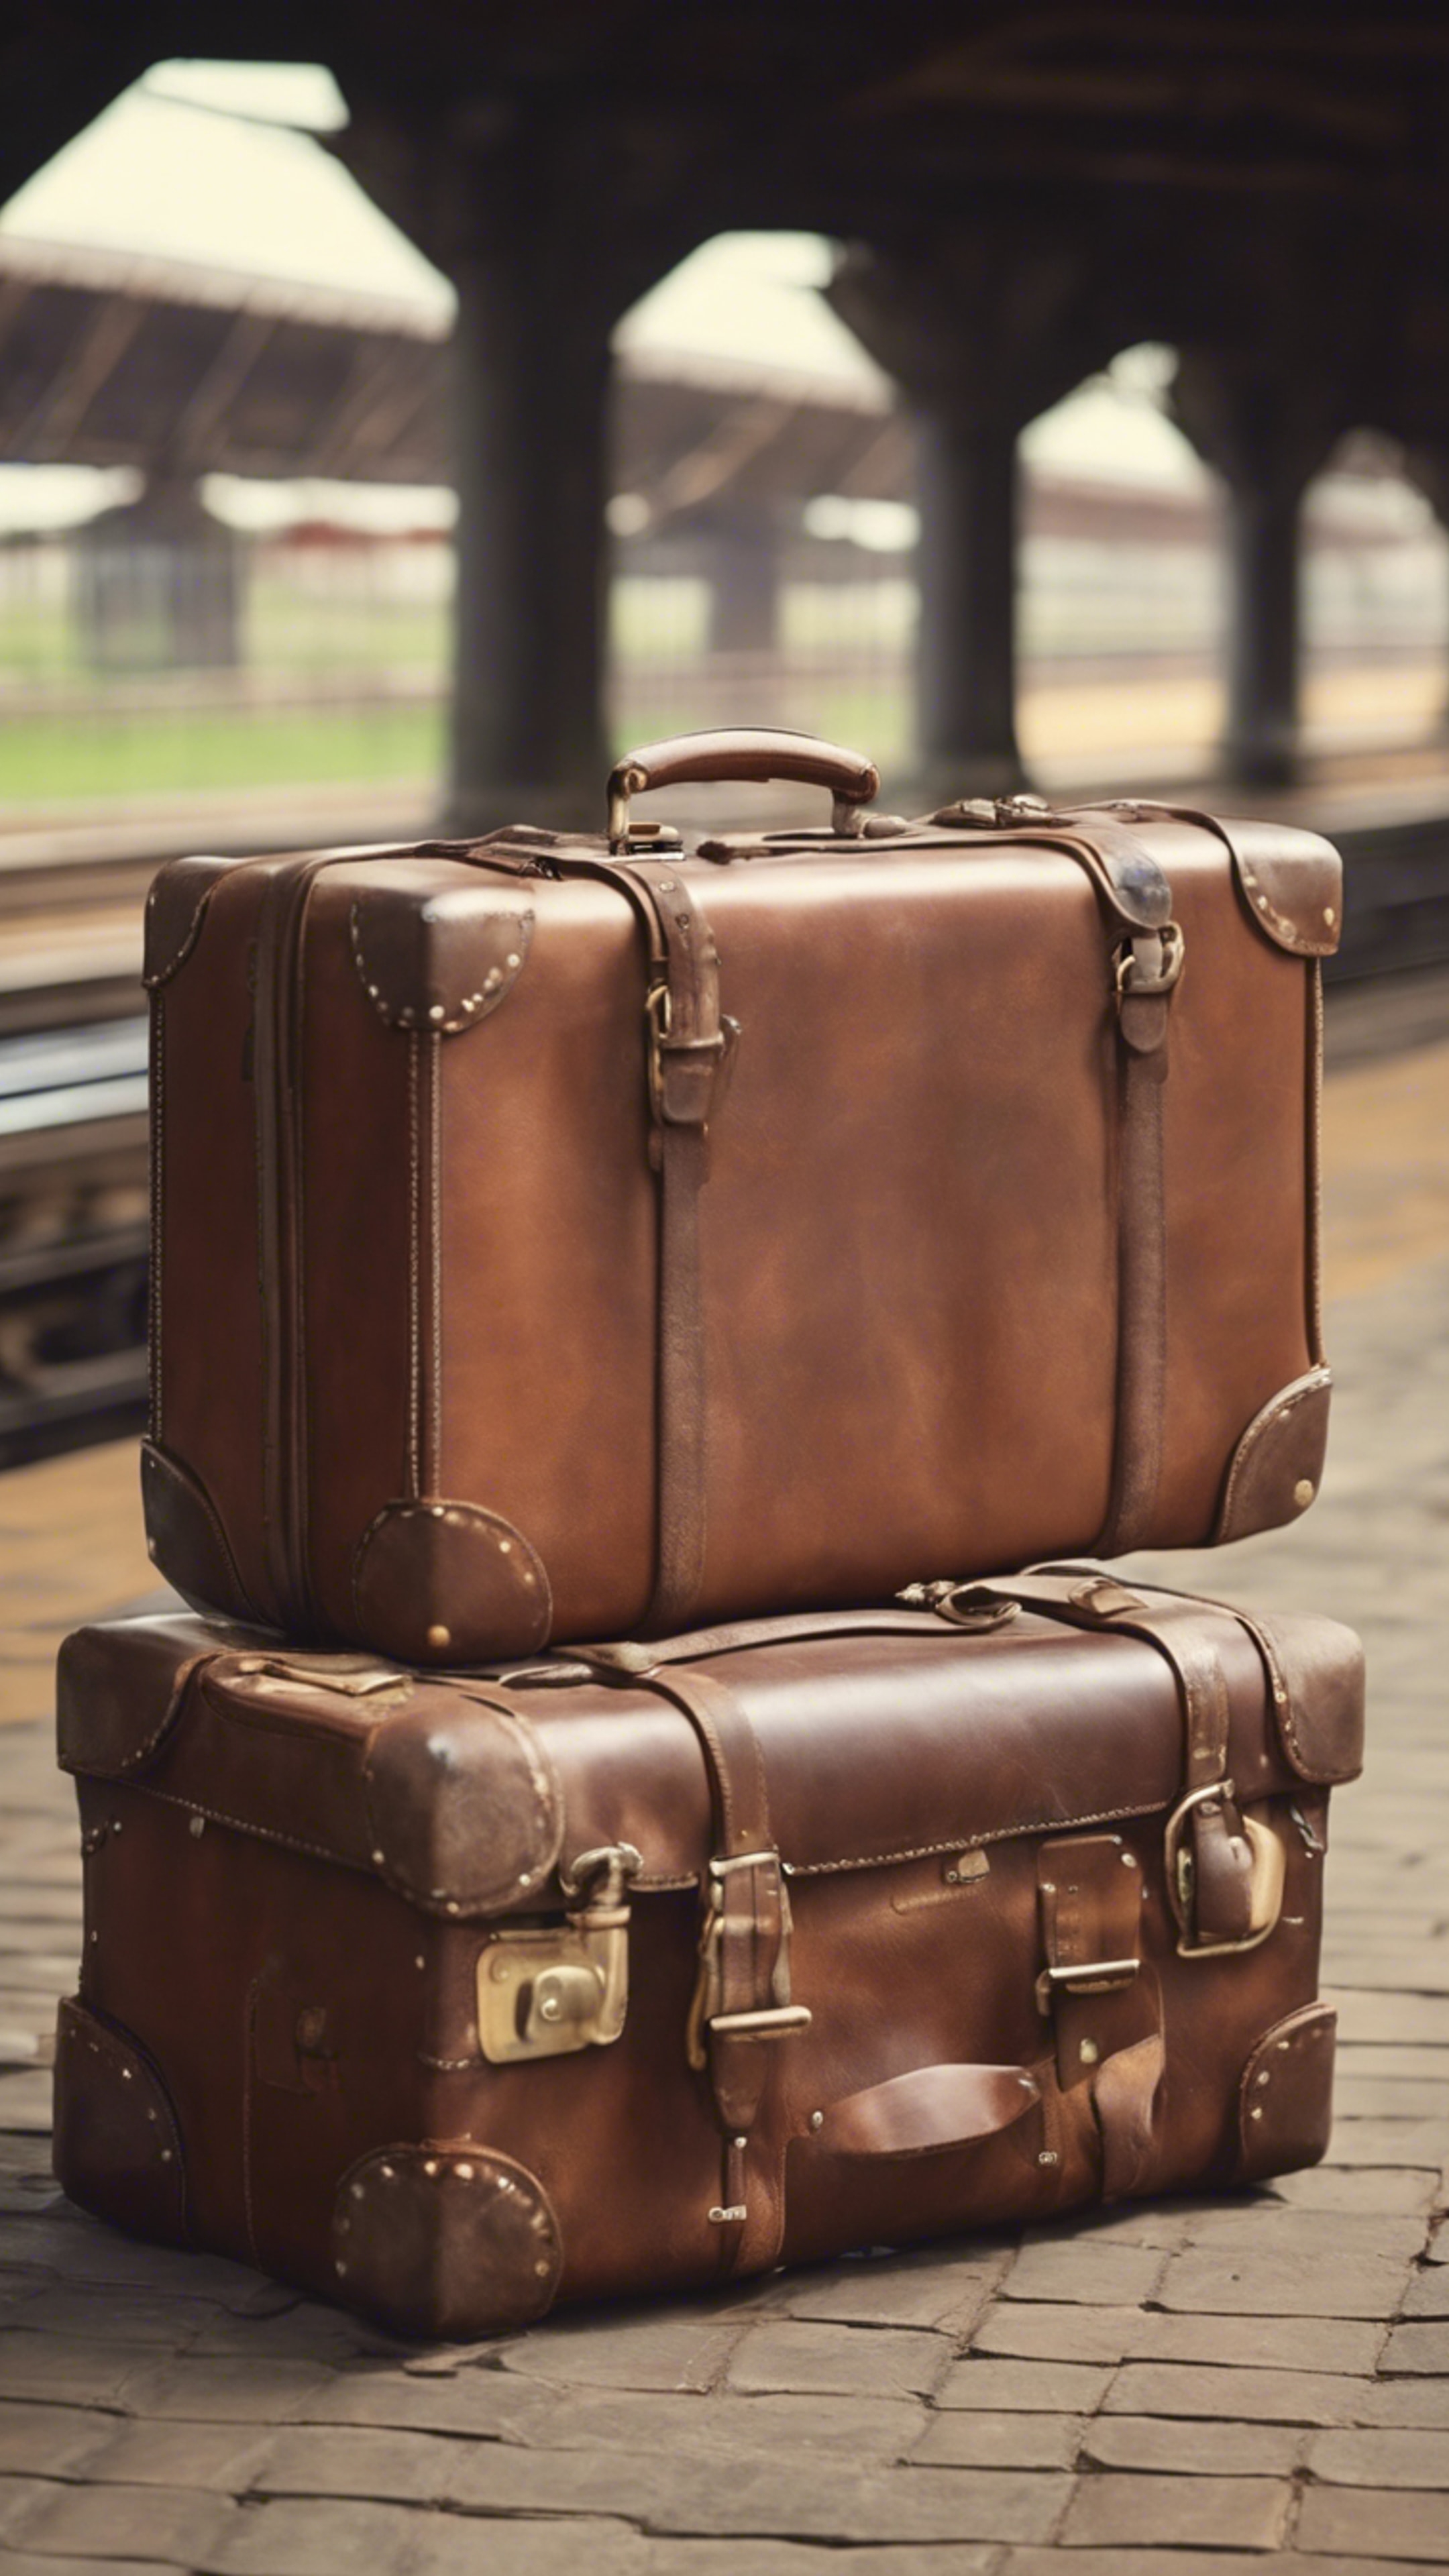 A rustic brown leather suitcase with travel tags, sitting at a quaint railway station. Hintergrund[6b7e956de06740cdbd0e]